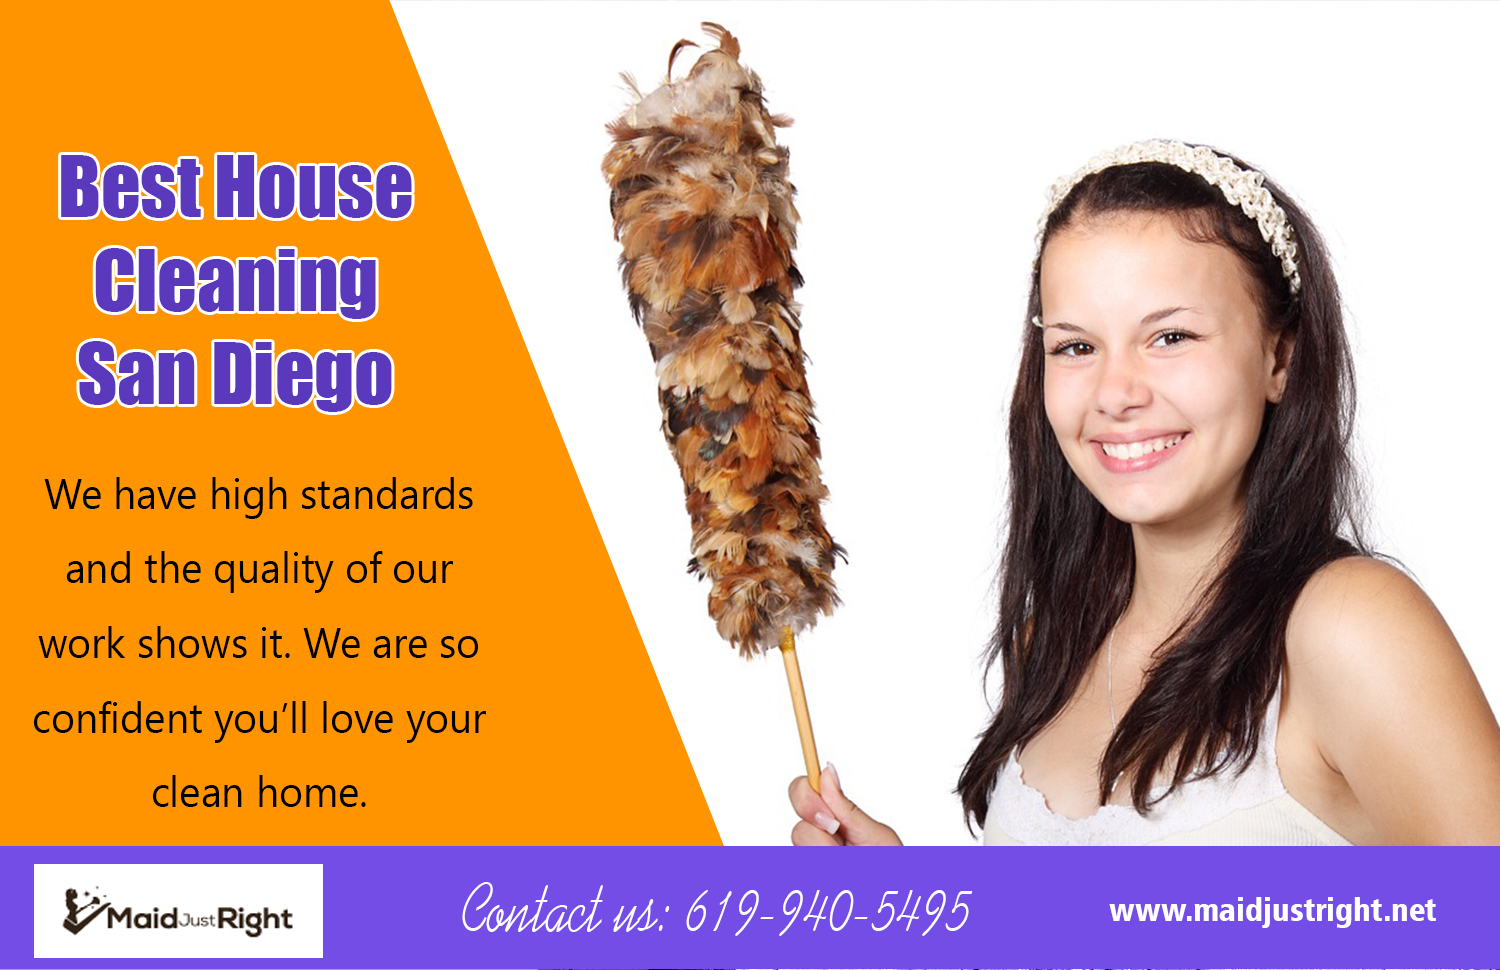 Best House Cleaning San Diego | Call Us - 619-940-5495 | maidjustright.net